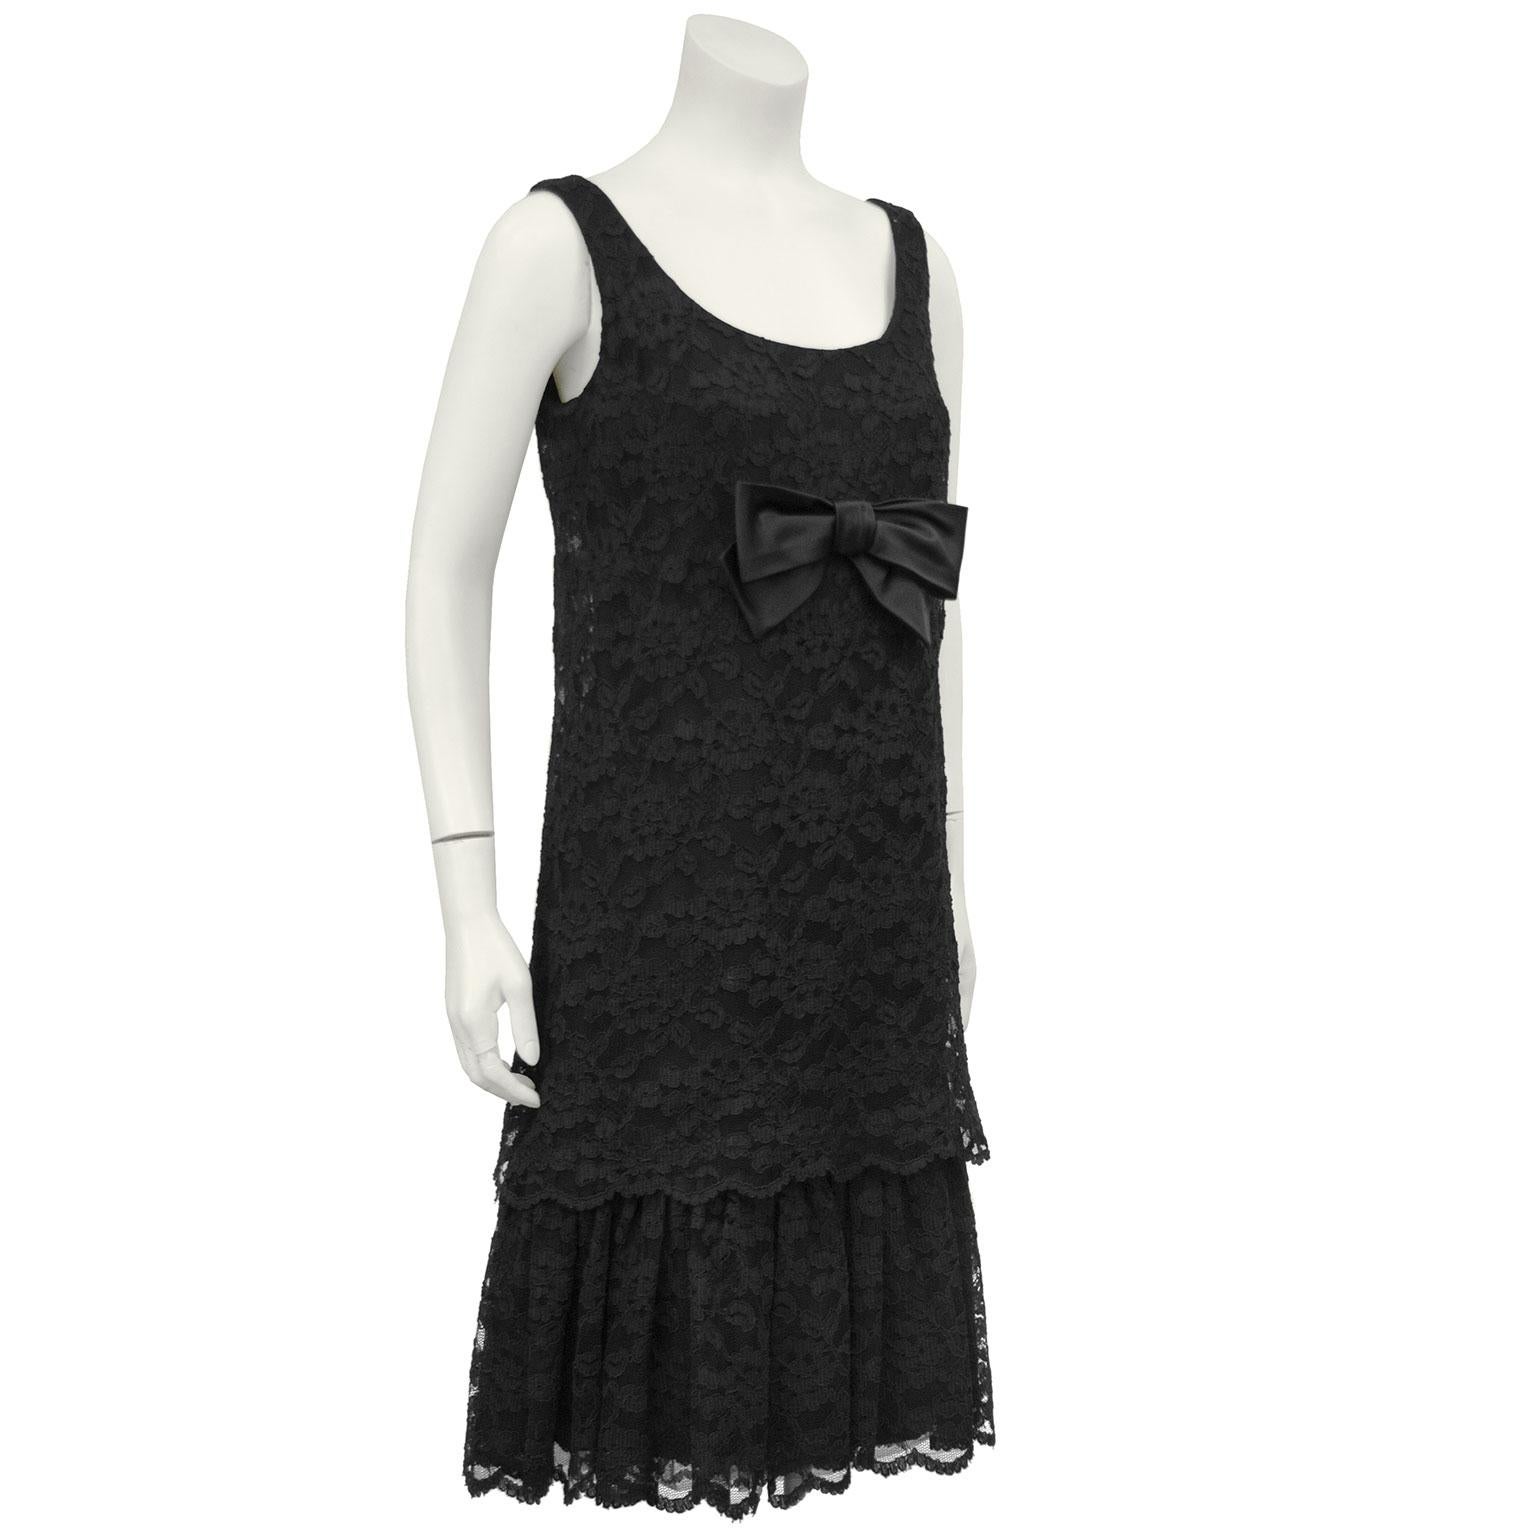 Black 1960s lace drop waist cocktail dress with the label Anita Modes. The sleeveless dress has a full black lace overlay with an added hem detail. Large black taffeta bow at the bust. Inner dress zips up the back, lace layer closes with snaps. In